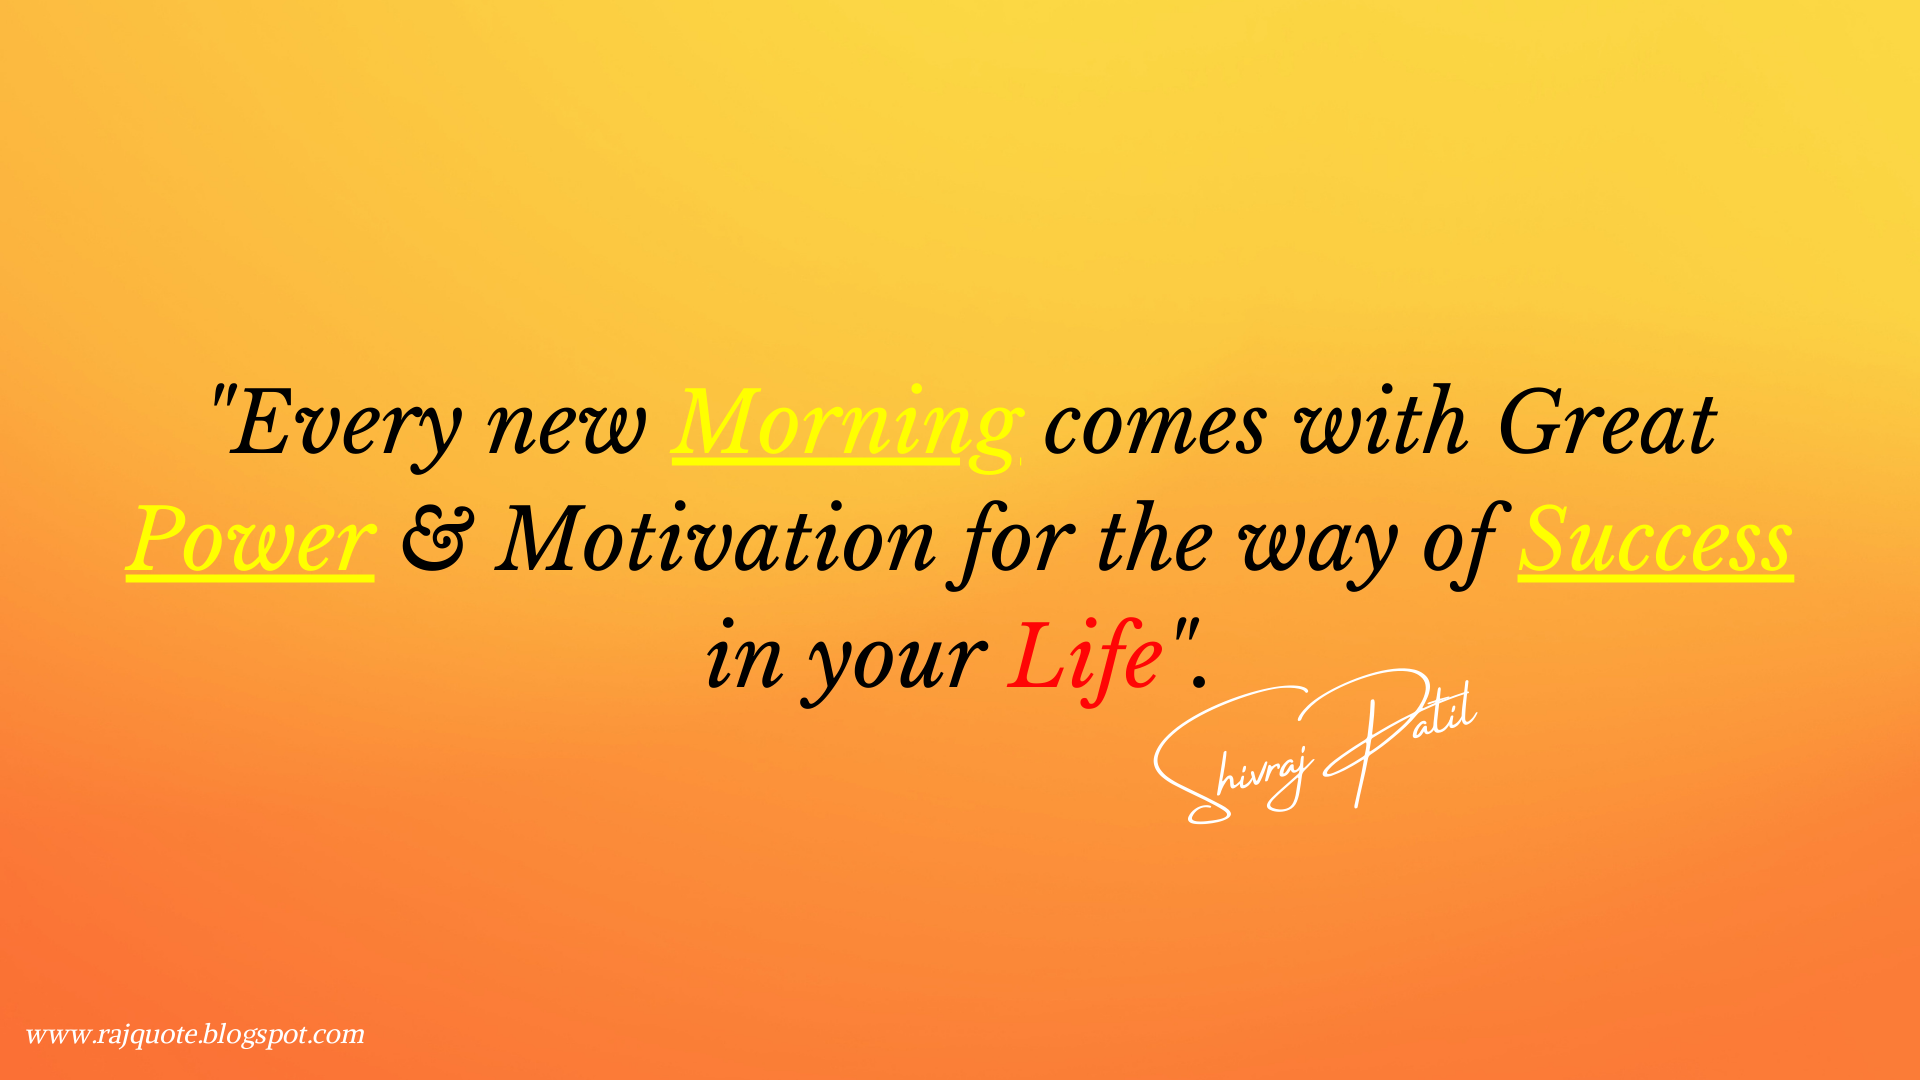 Every New Morning Comes with Great Power & Motivation for the Way of Success In your Life